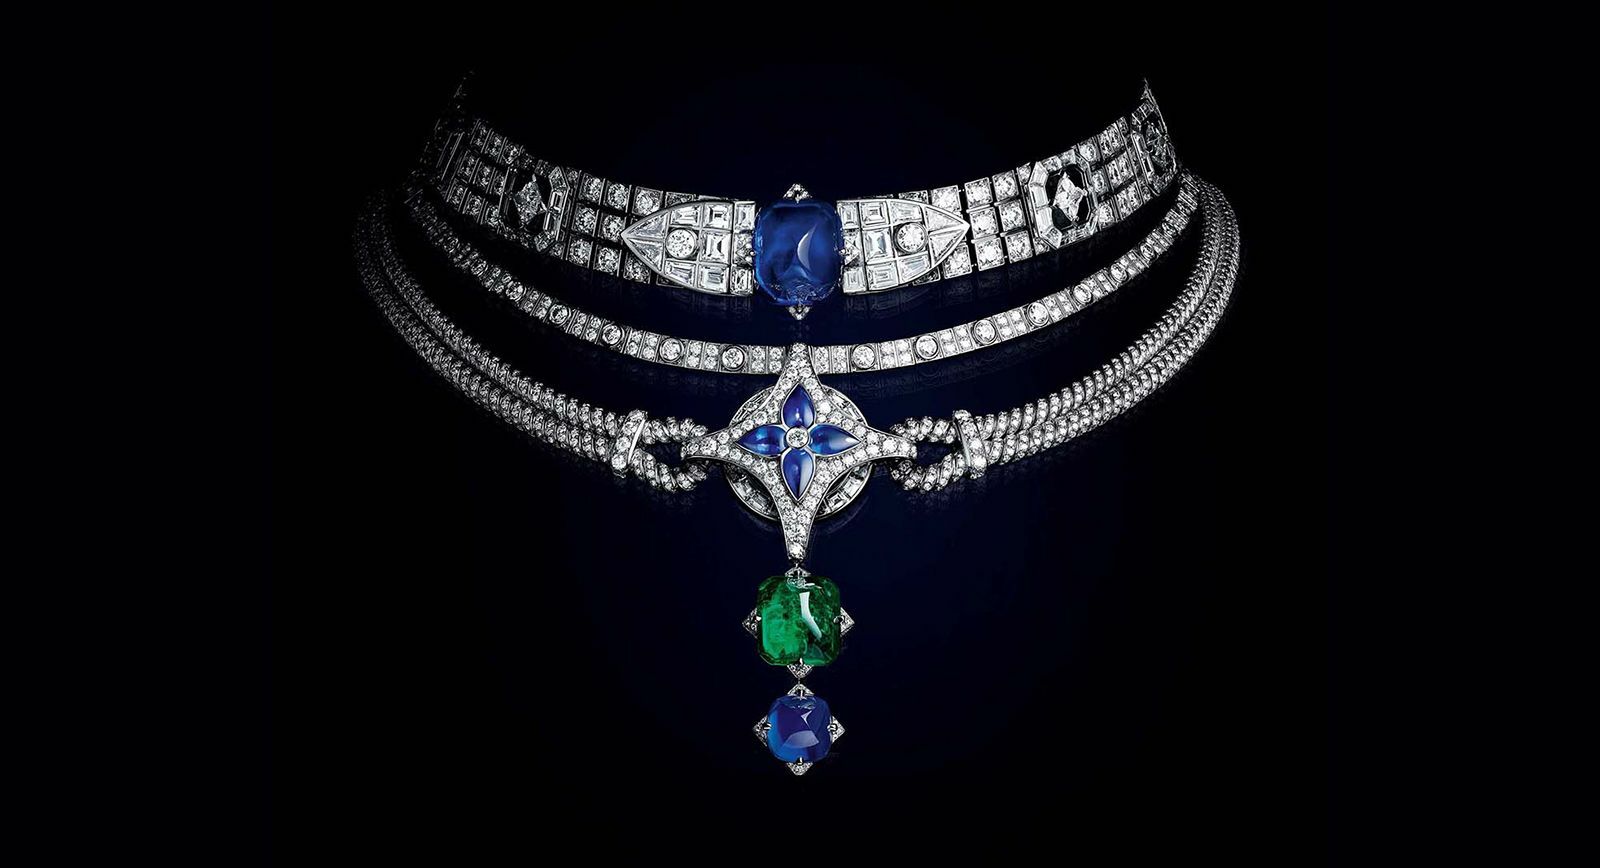 Le Mythe necklace with sapphires, emeralds and diamonds from the Bravery by Louis Vuitton Collection